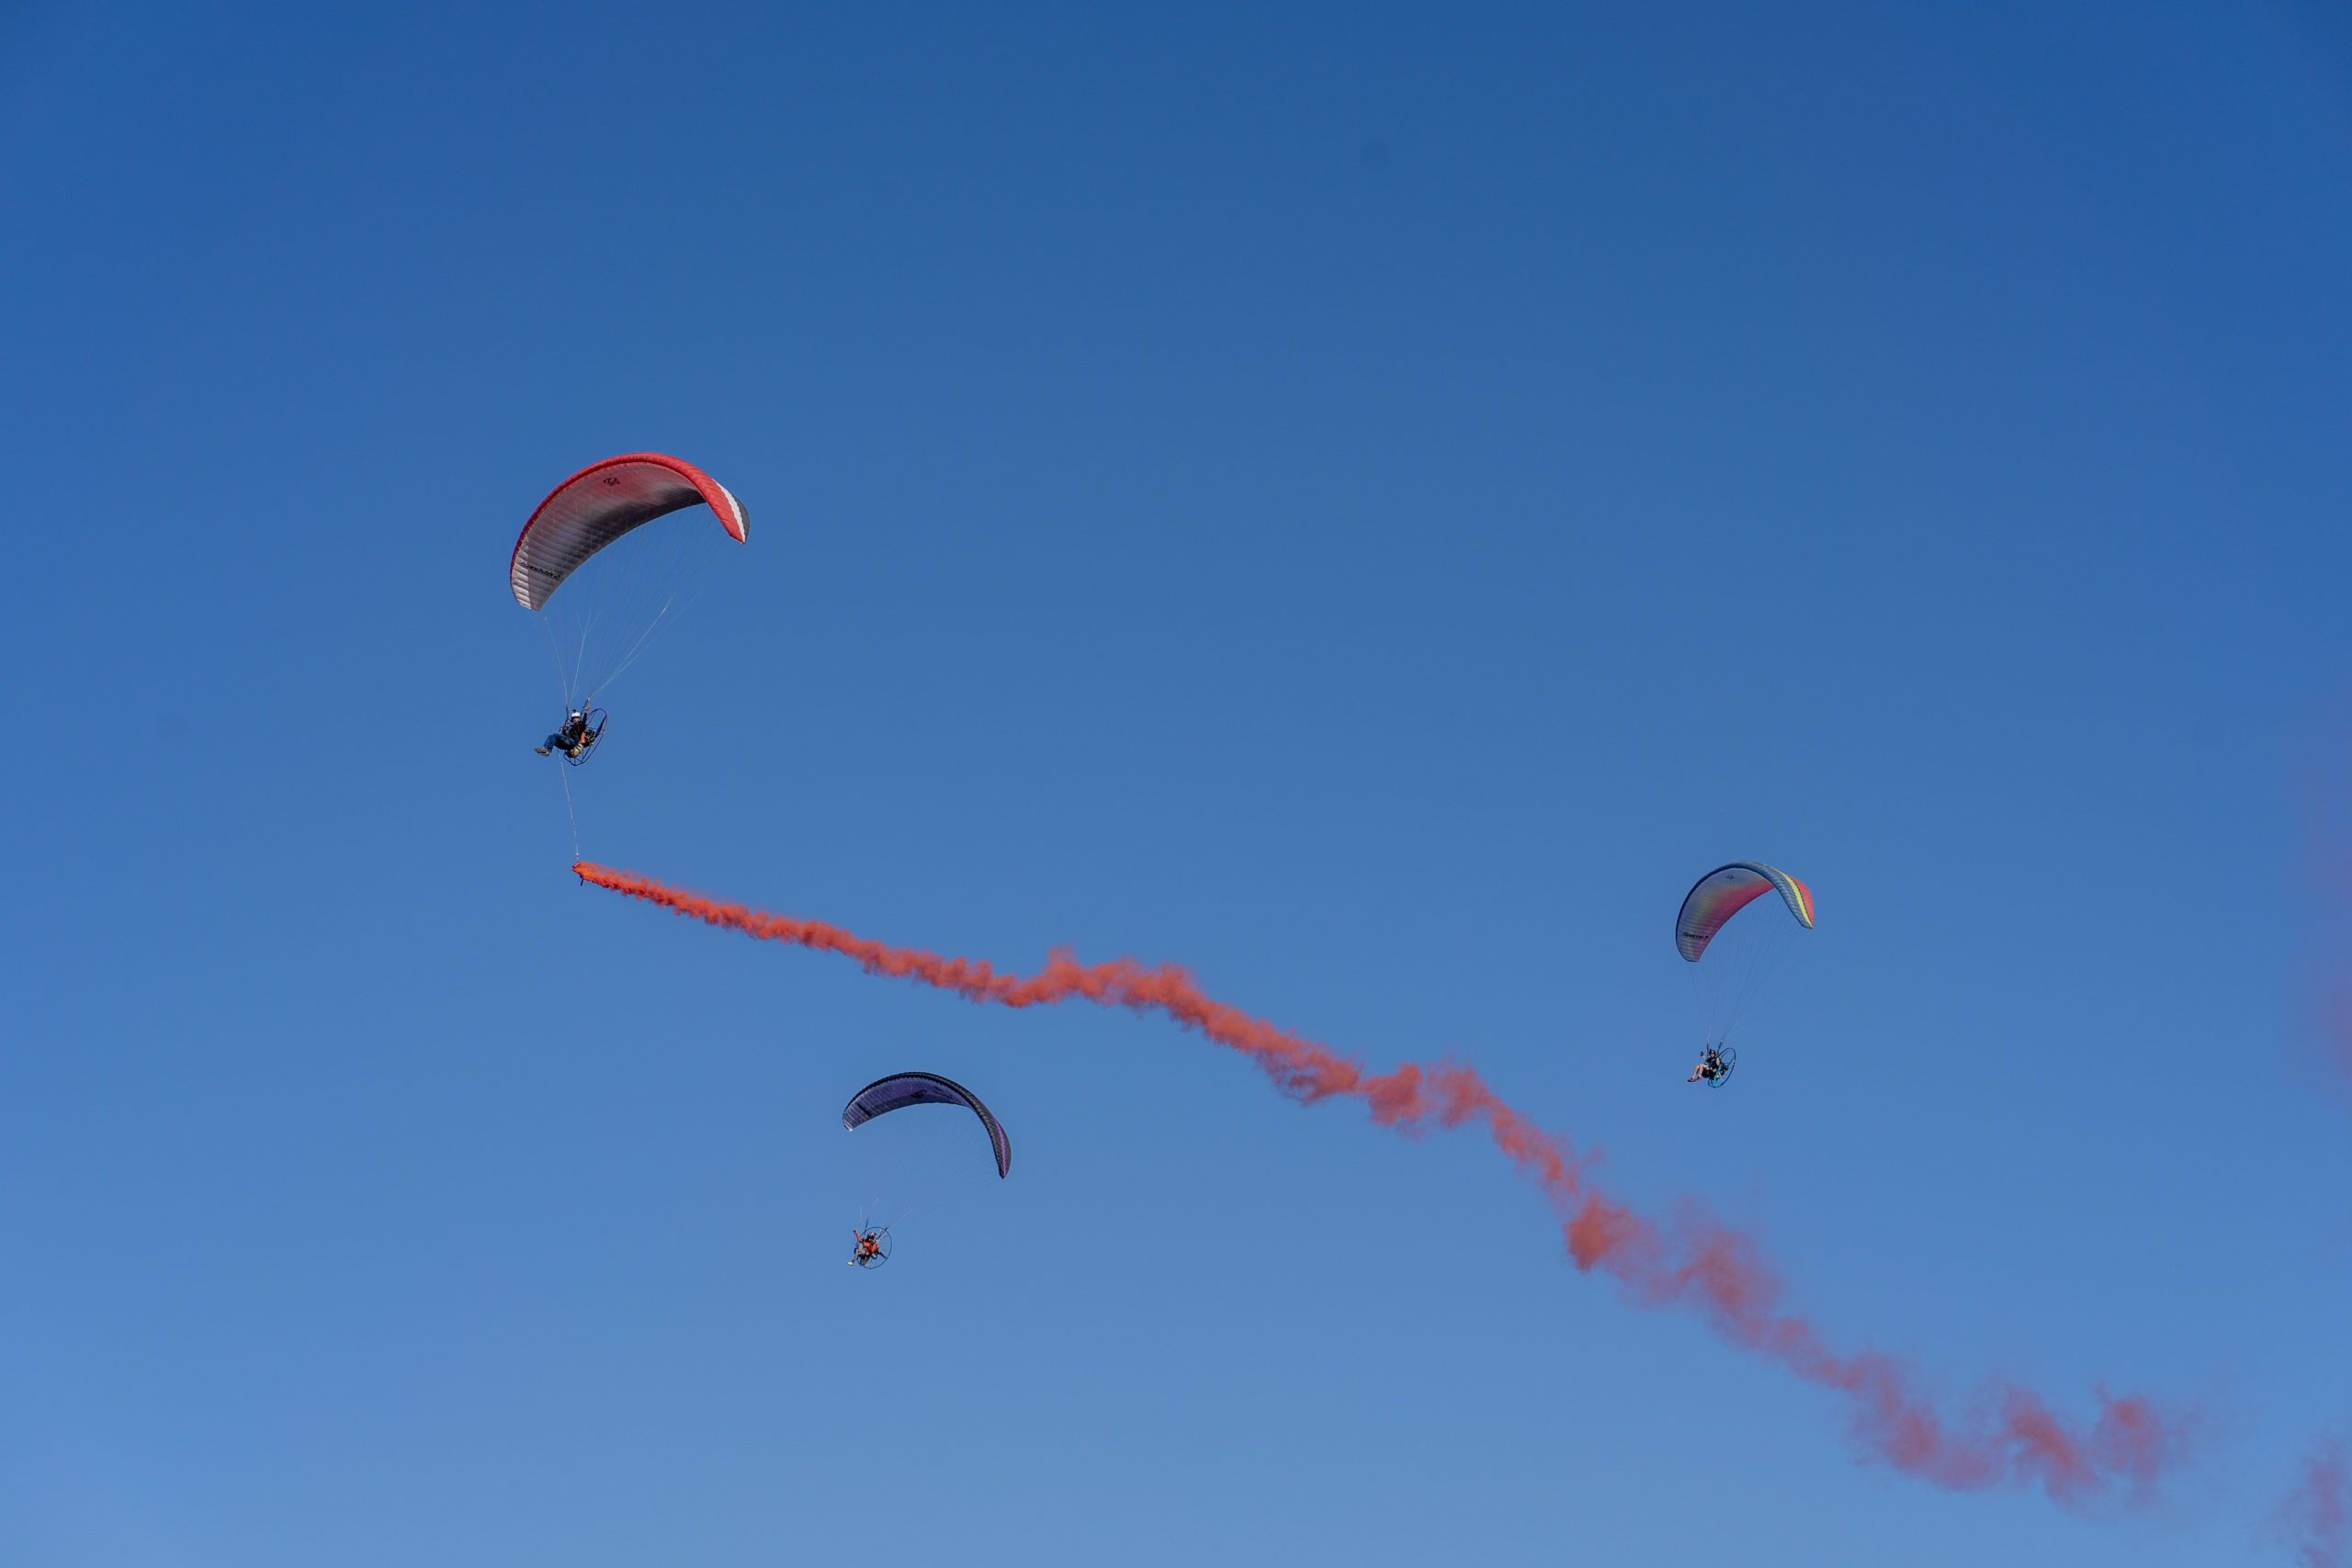 Air Sports: Sky Sports in Egypt, Three paragliders and red color vapor trail in the blue sky, Air vehicles. 2560x1710 HD Background.